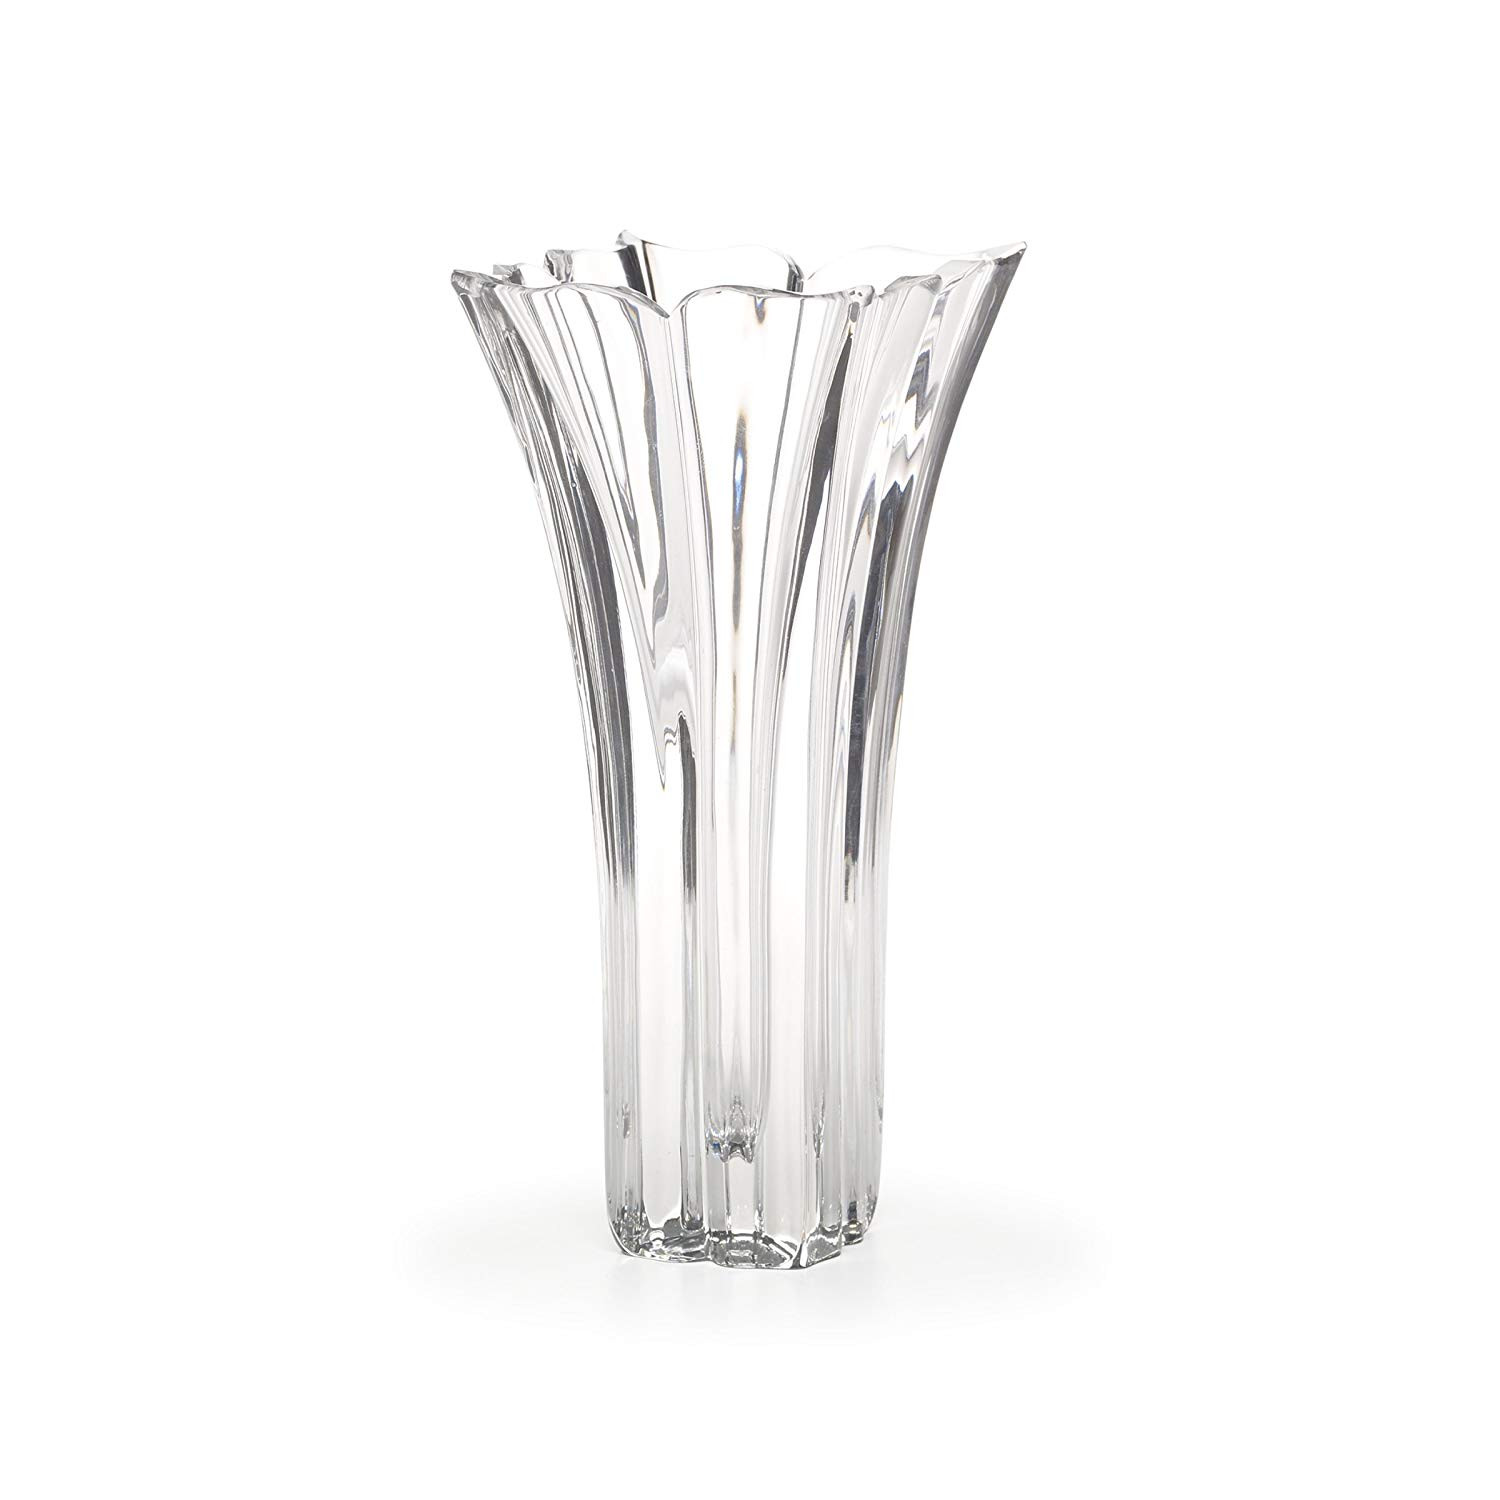 Mikasa Florale 14 Inch Vase Of Amazon Com Mikasa Crystal Florale Bud Vase 8 Inch Home Kitchen Pertaining to 71 Mobl H4l Sl1500